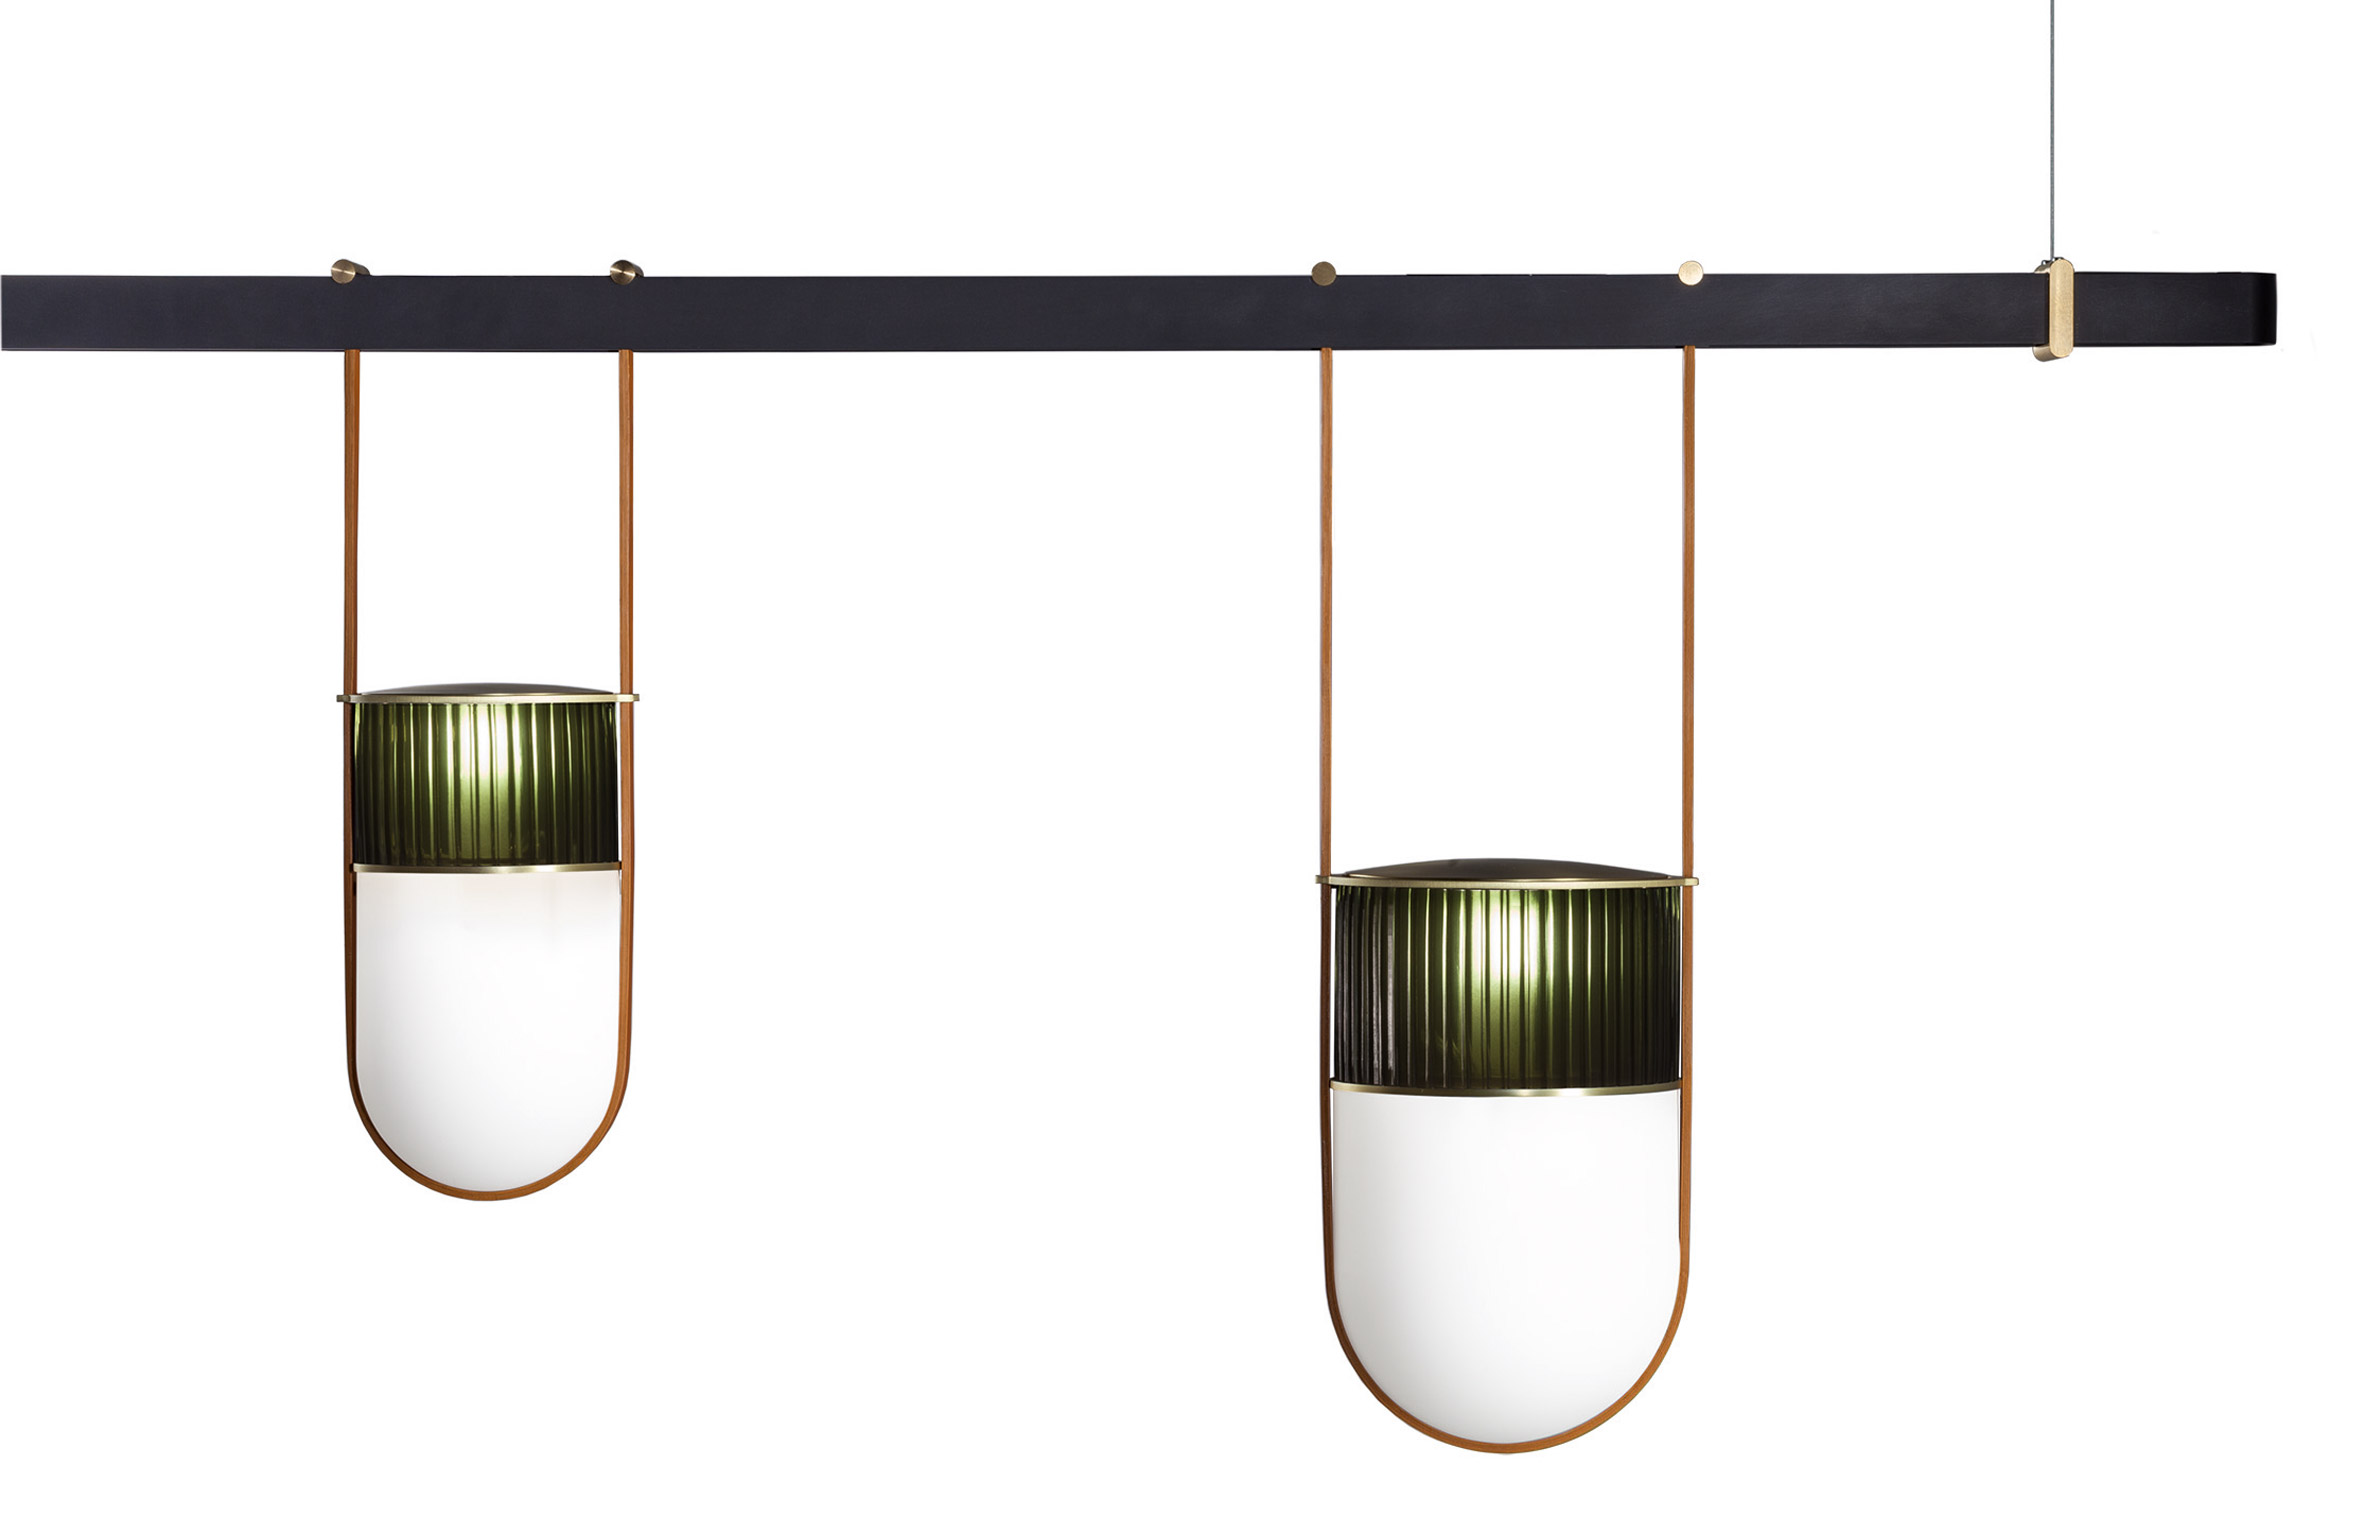 Neri&Hu's Xi lamps are designed to emulate the early morning sunlight